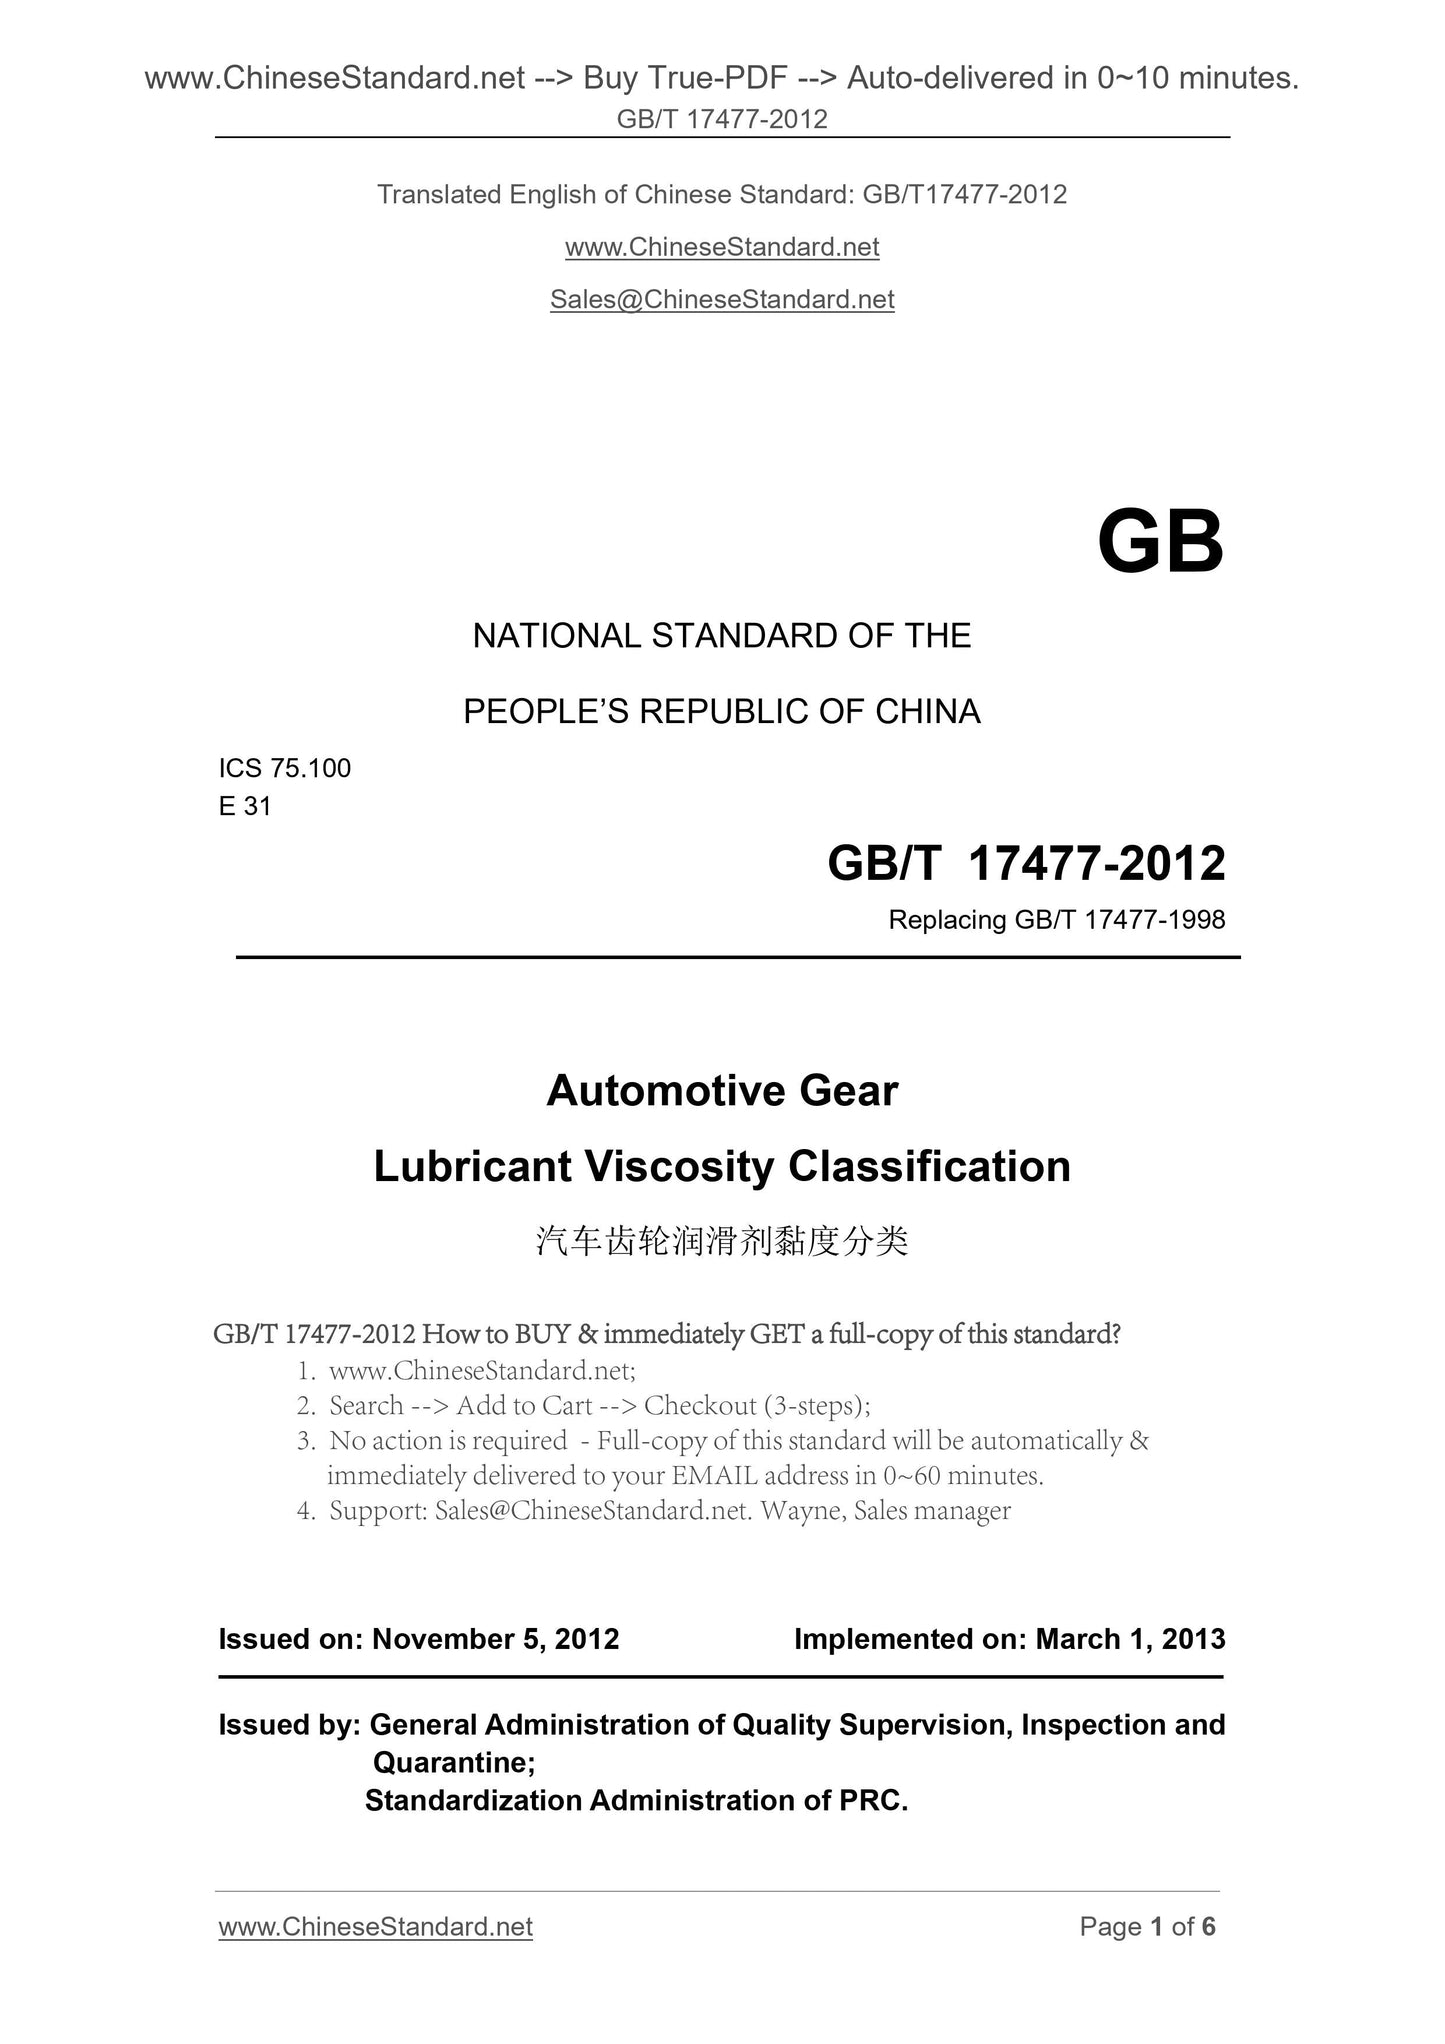 GB/T 17477-2012 Page 1